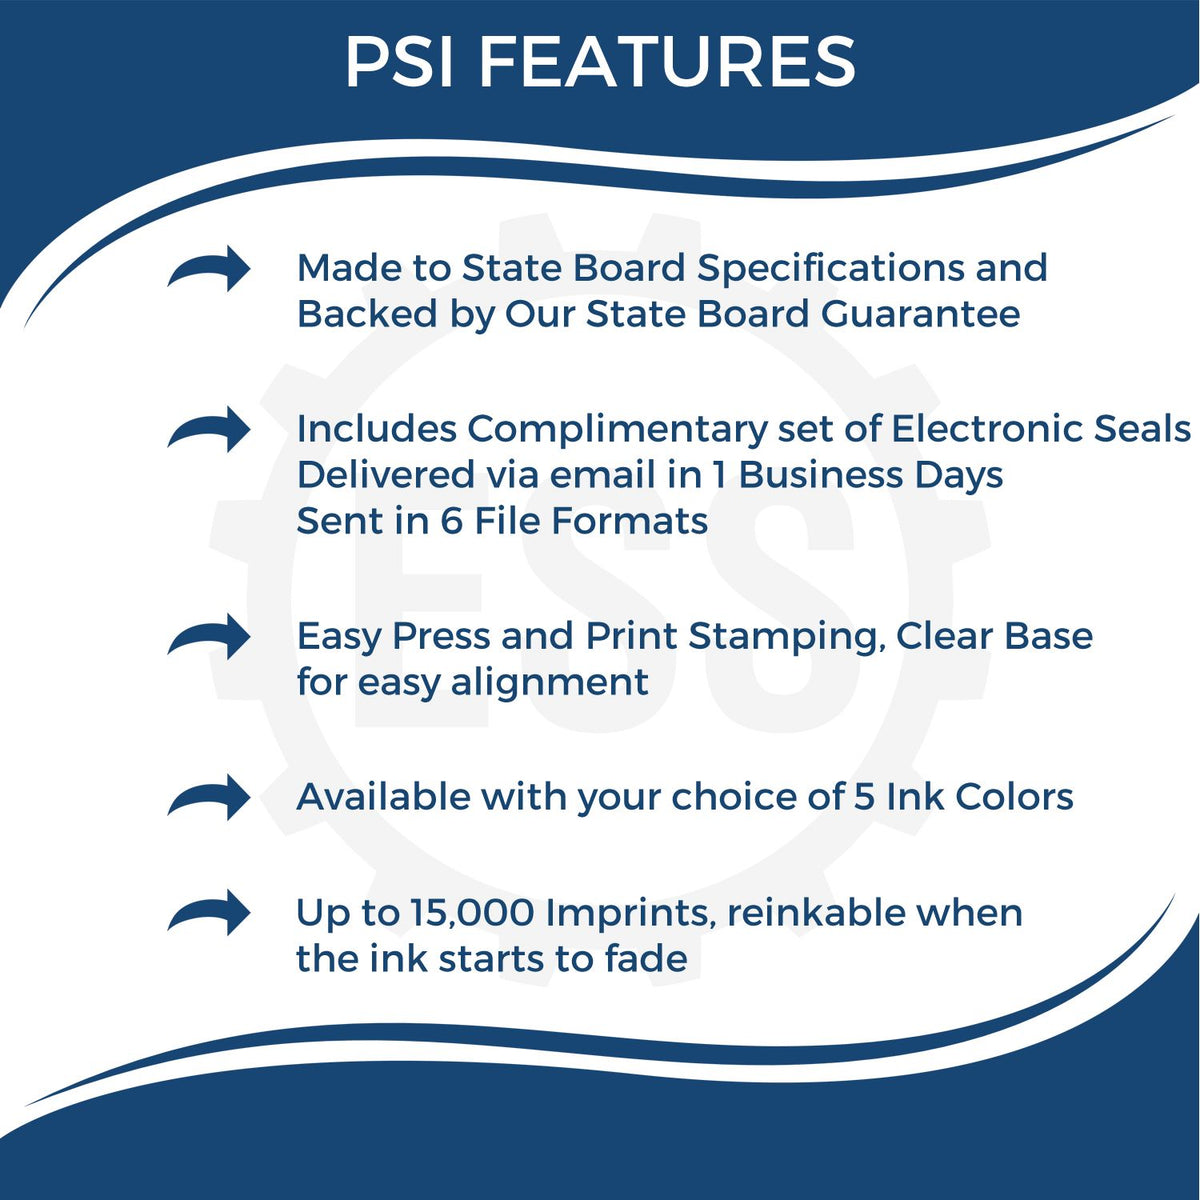 A picture of an infographic highlighting the selling points for the PSI New York Notary Stamp